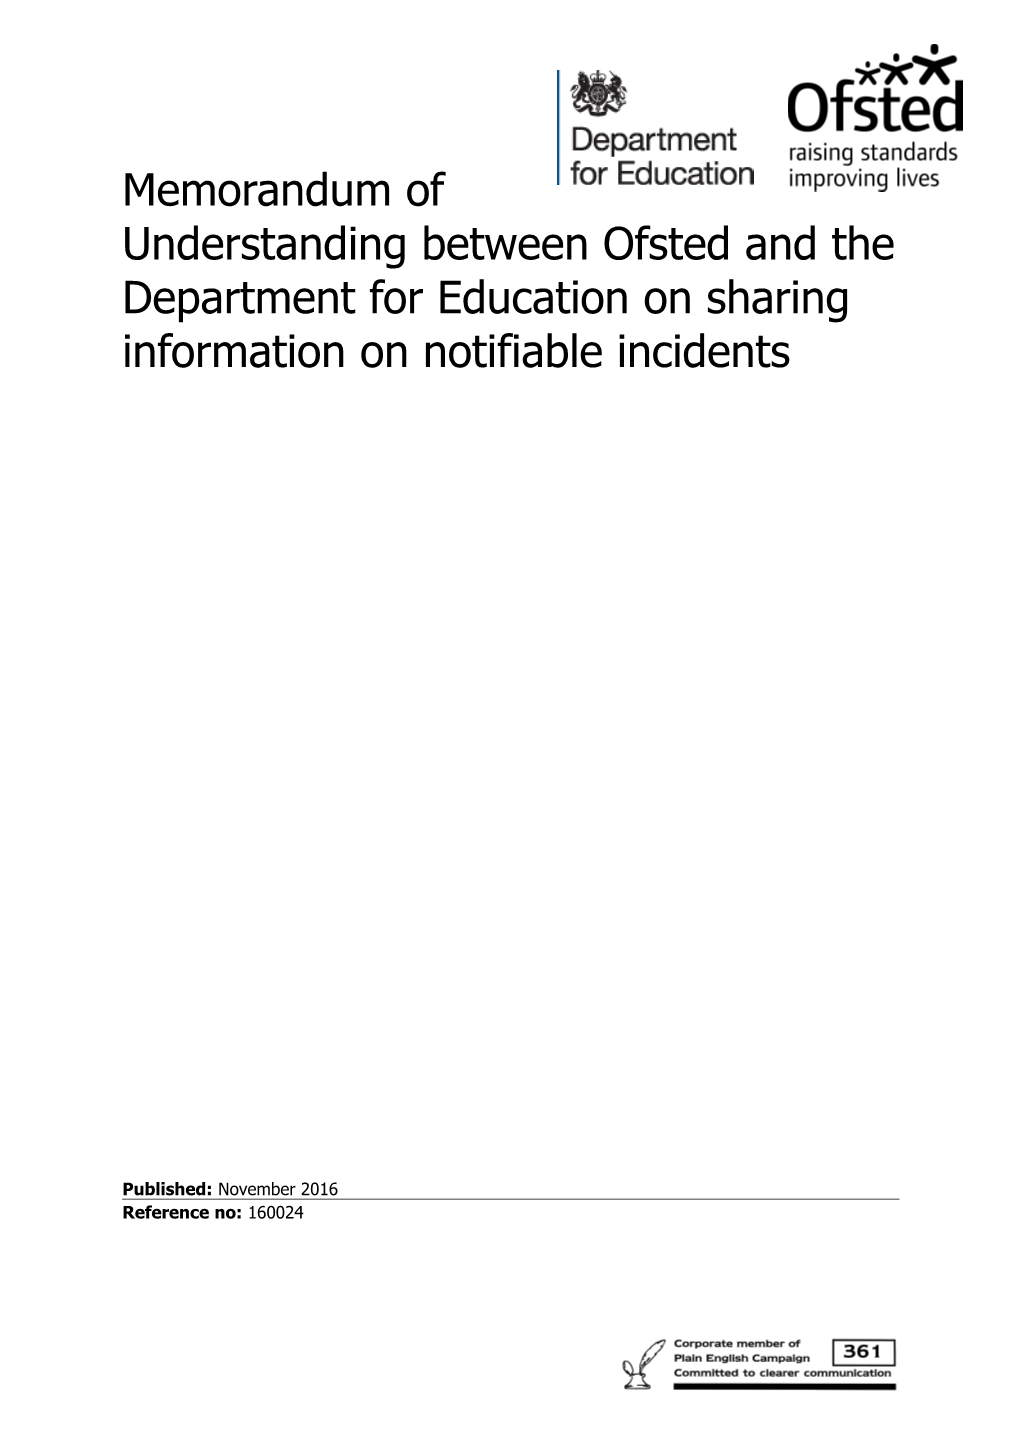 Role of Ofsted and the Department for Education